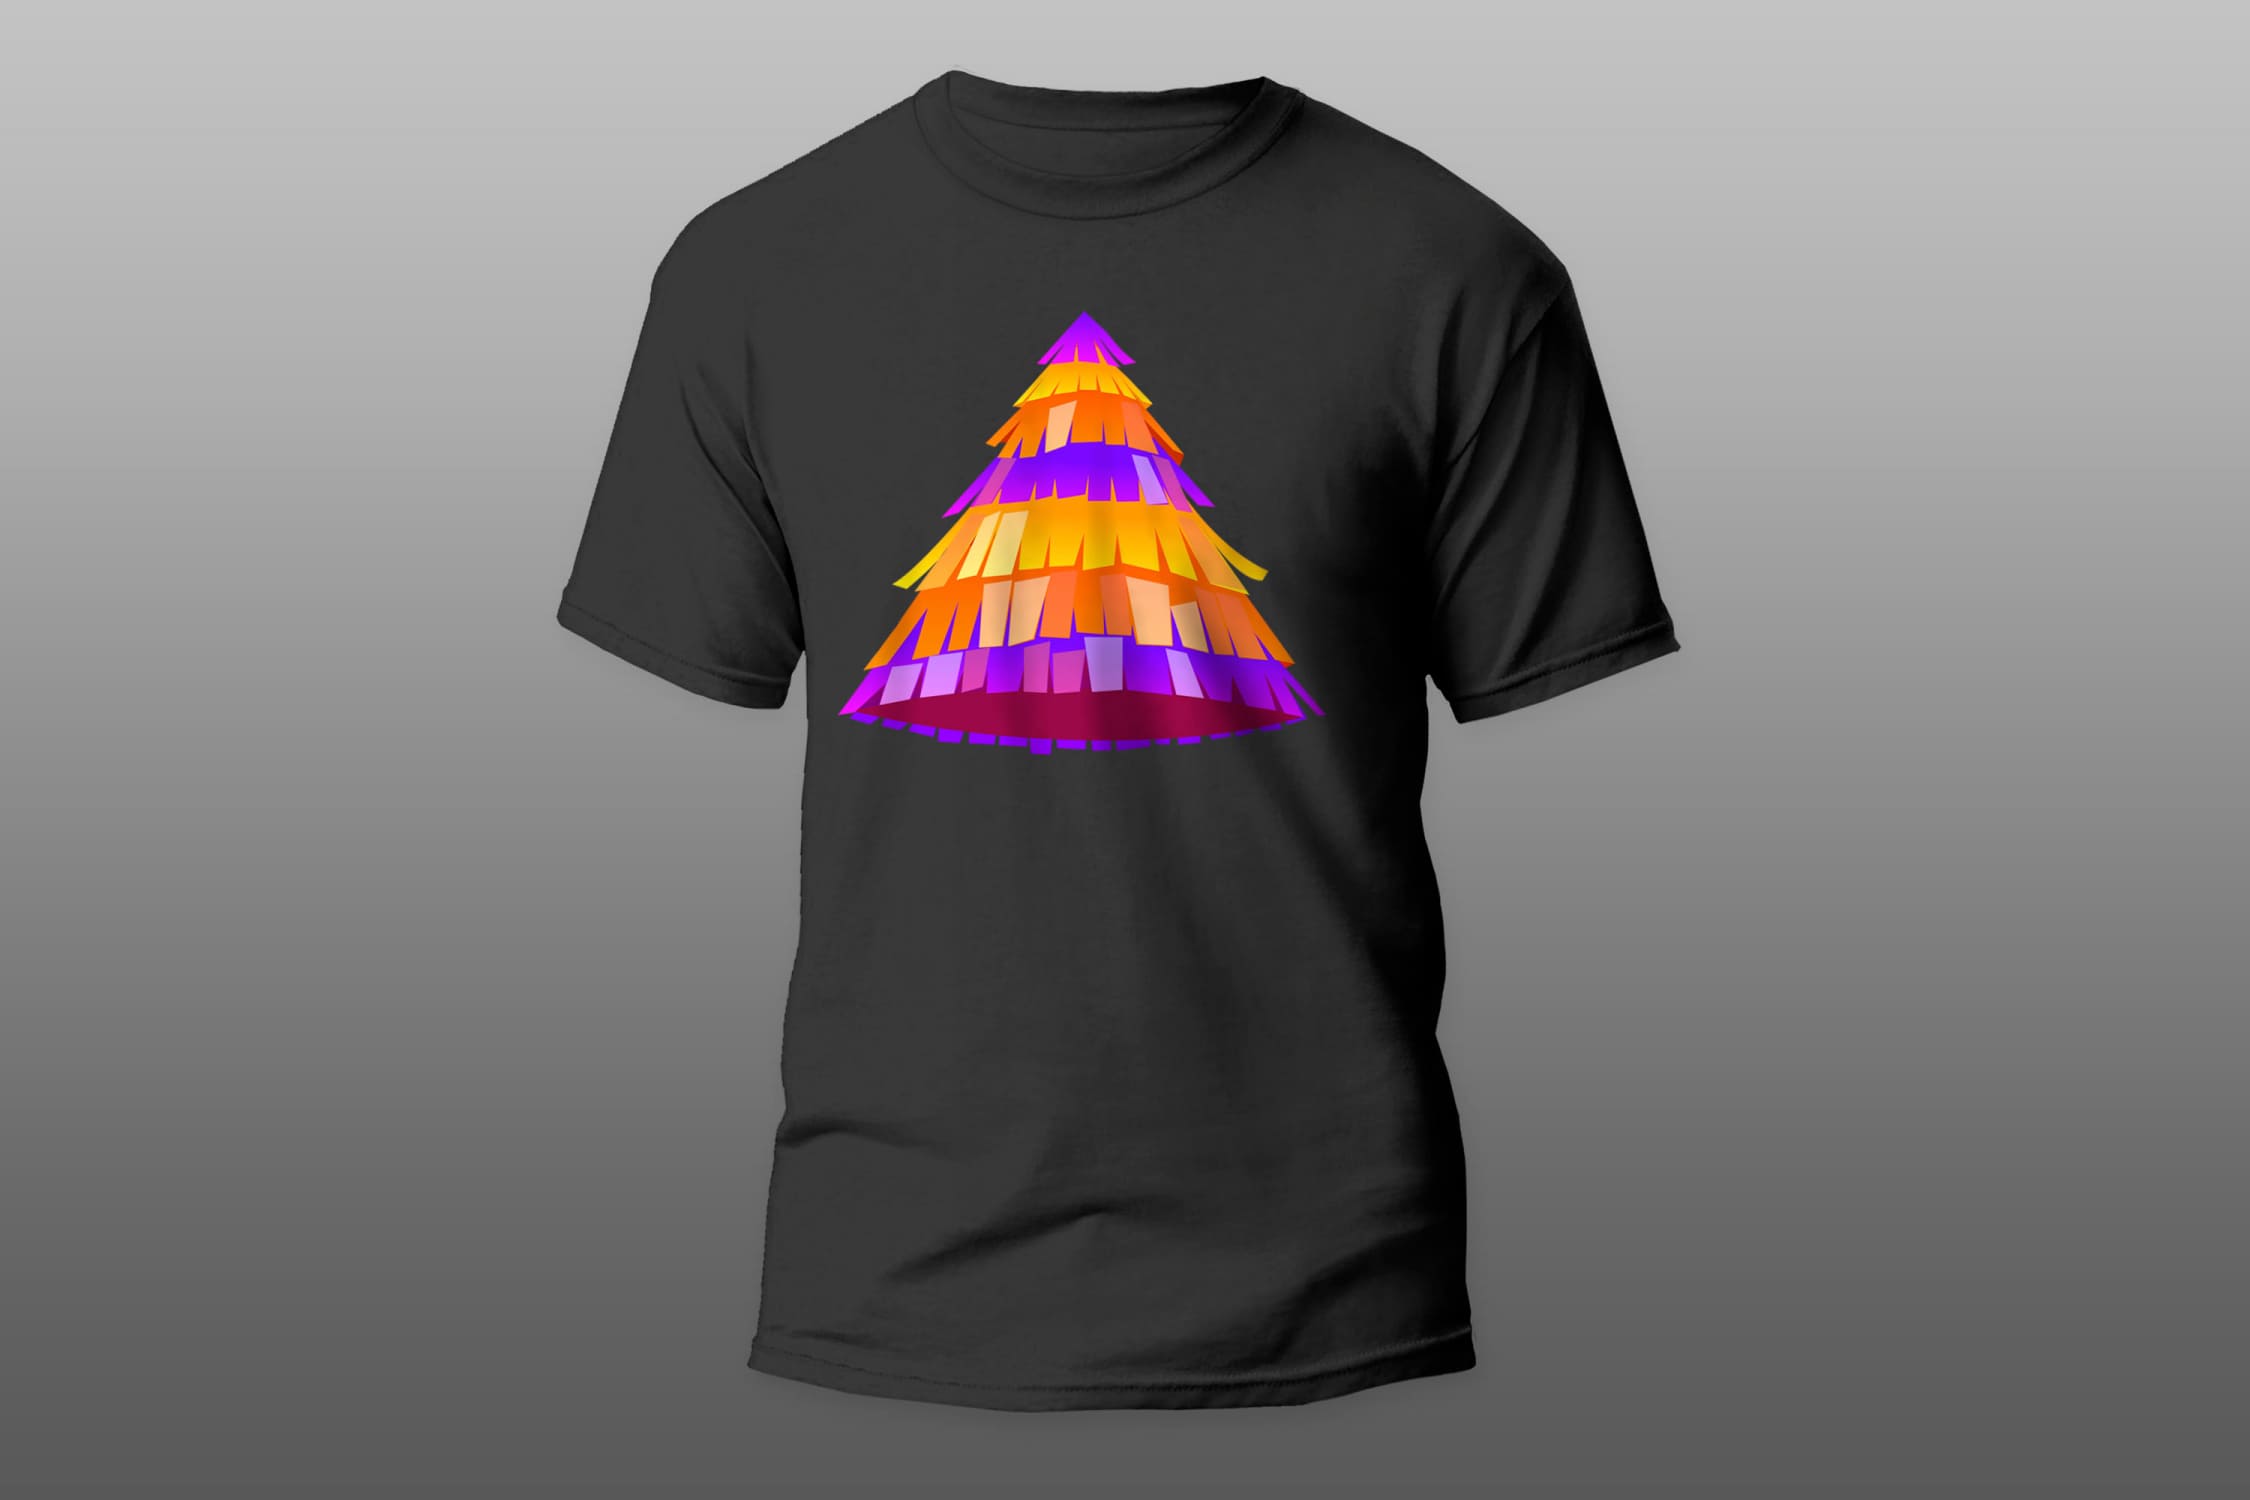 Black t-shirt with a colorful christmas tree on a gray gradient background.